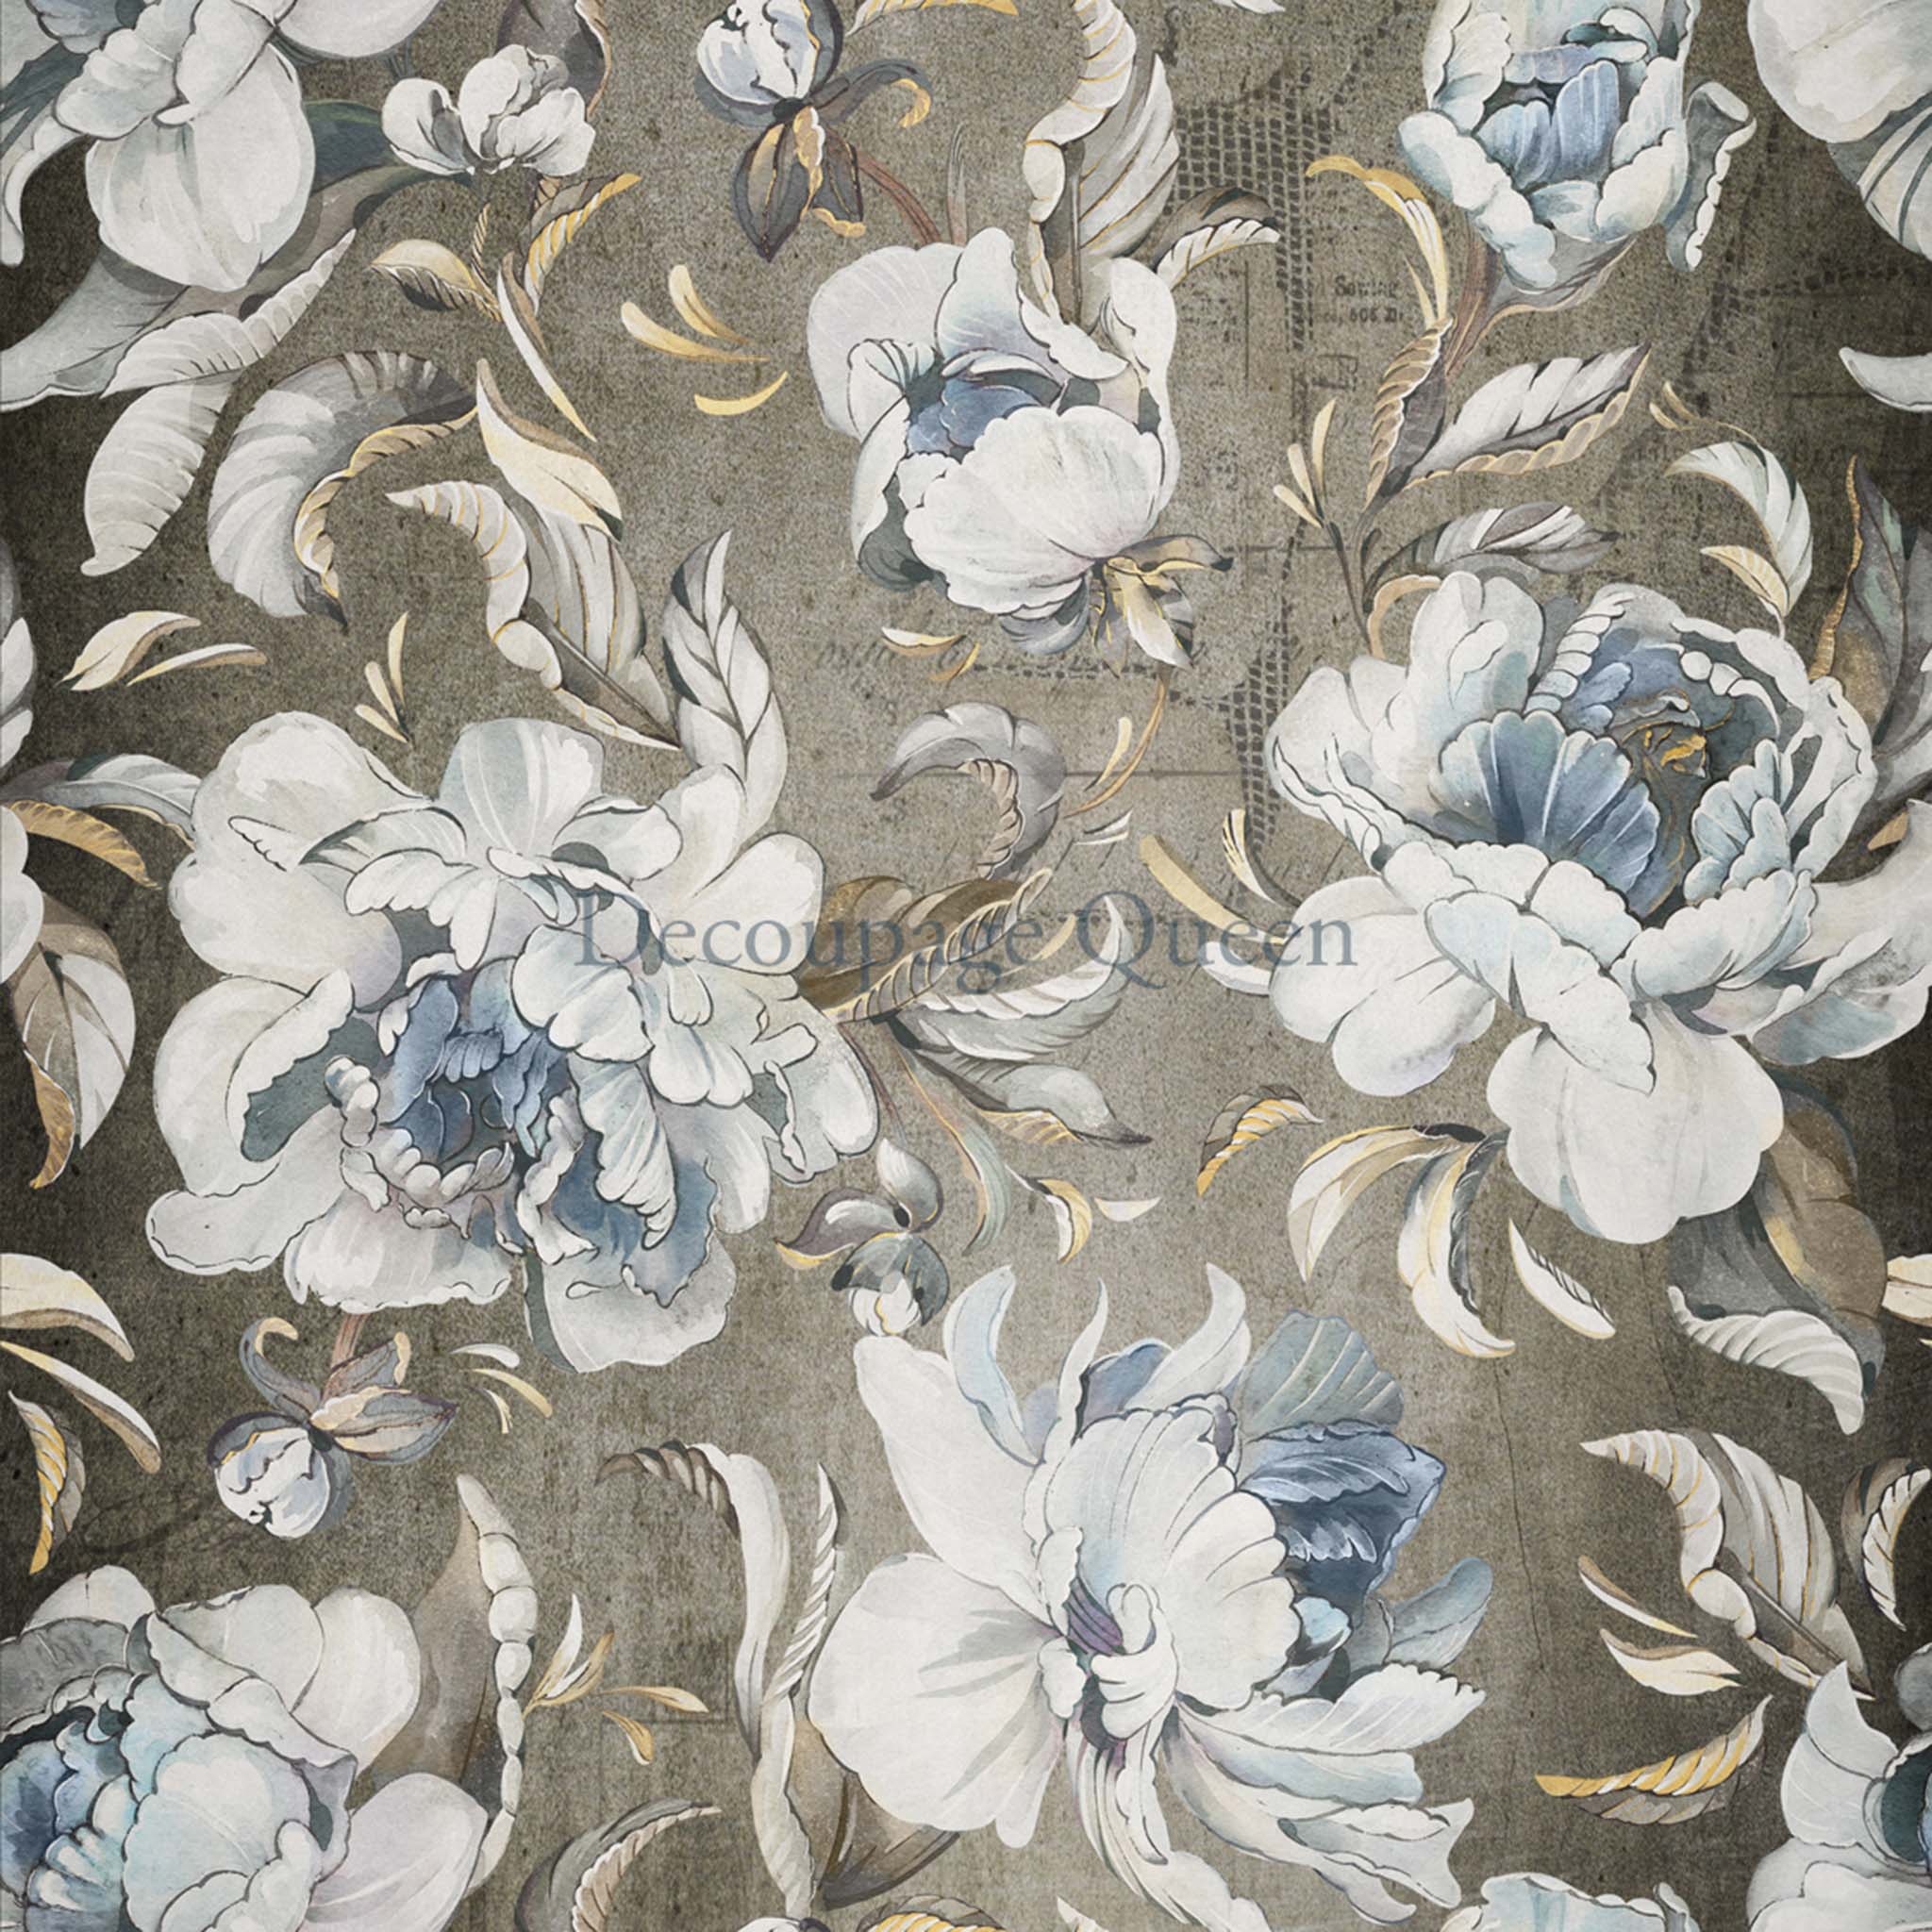 Close-up of an A2 rice paper that features a soft gray background, adorned with delicate white and blue flower designs.